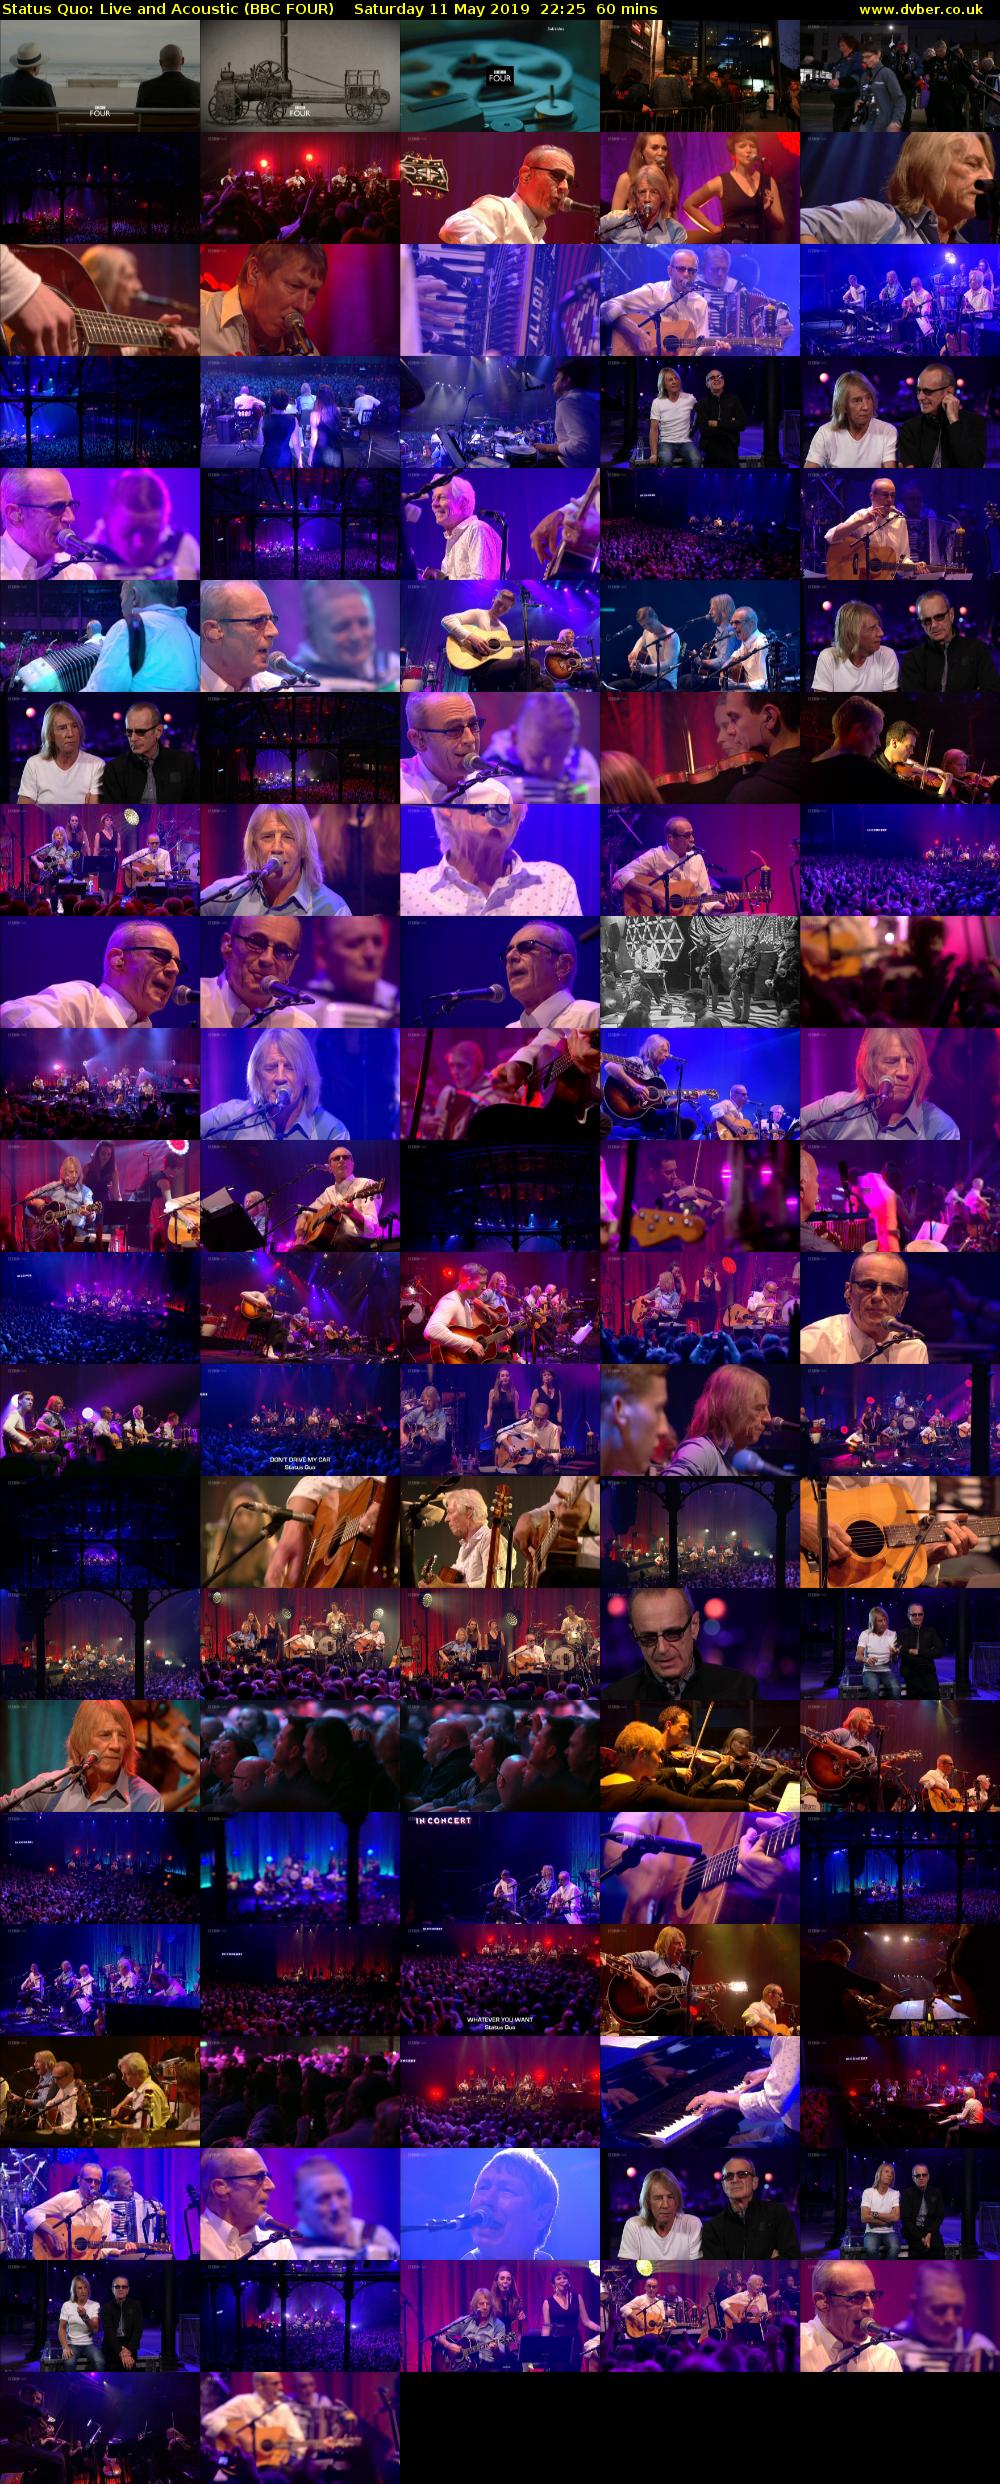 Status Quo: Live and Acoustic (BBC FOUR) Saturday 11 May 2019 22:25 - 23:25